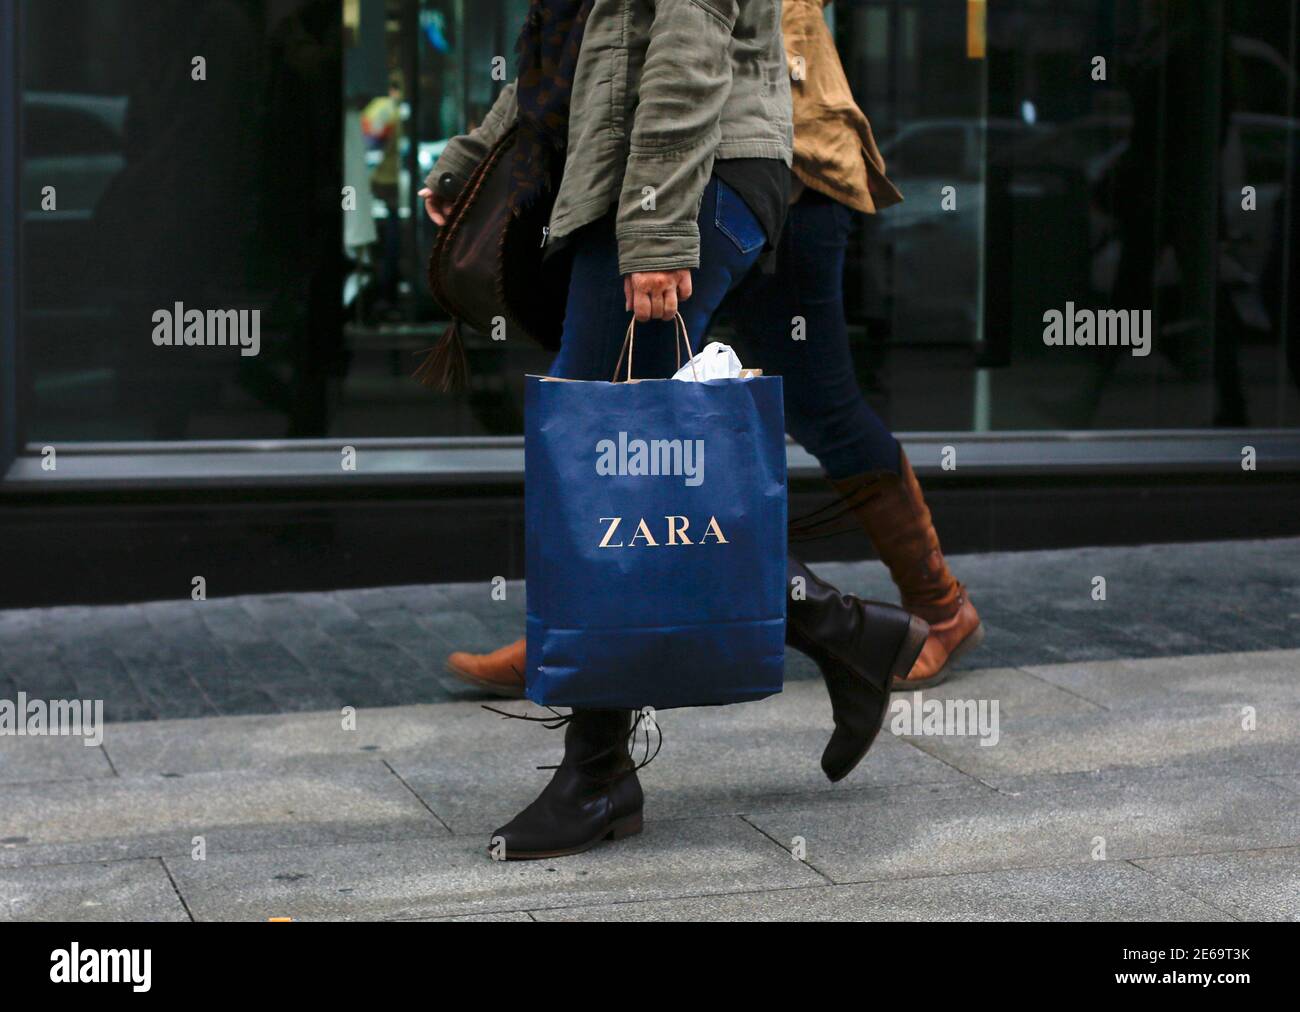 Shoppers leave a Zara store in central Madrid, November 5, 2013. The  world's largest fashion retailer, Inditex, shows no sign of stalling and  investors are betting that its Zara "fast fashion" model